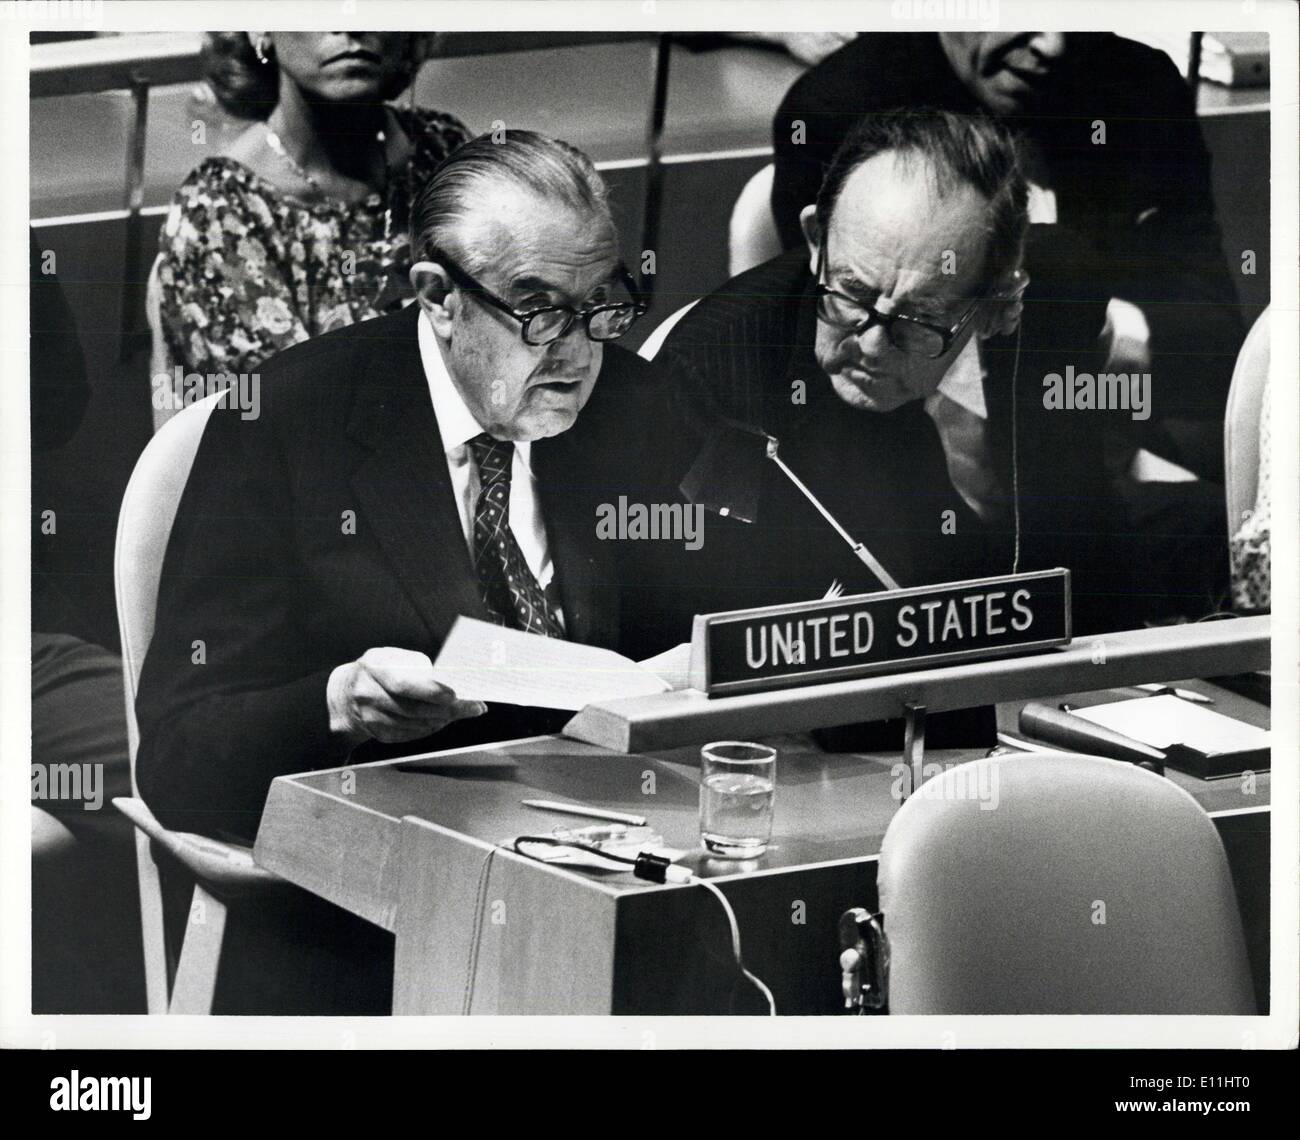 Jun. 21, 1978 - United Nations GA Special Session On Disarmament W. Averell Harriman U.S. Representative to the U.N. General Assembly Special on Disarmament Addressing the Ad Hoc Committee on the spread of Nuclear Weapons. L-R: W. Averell Harriman, Amb Adrian Fisher (Arms Control Disarmament Agency) Stock Photo